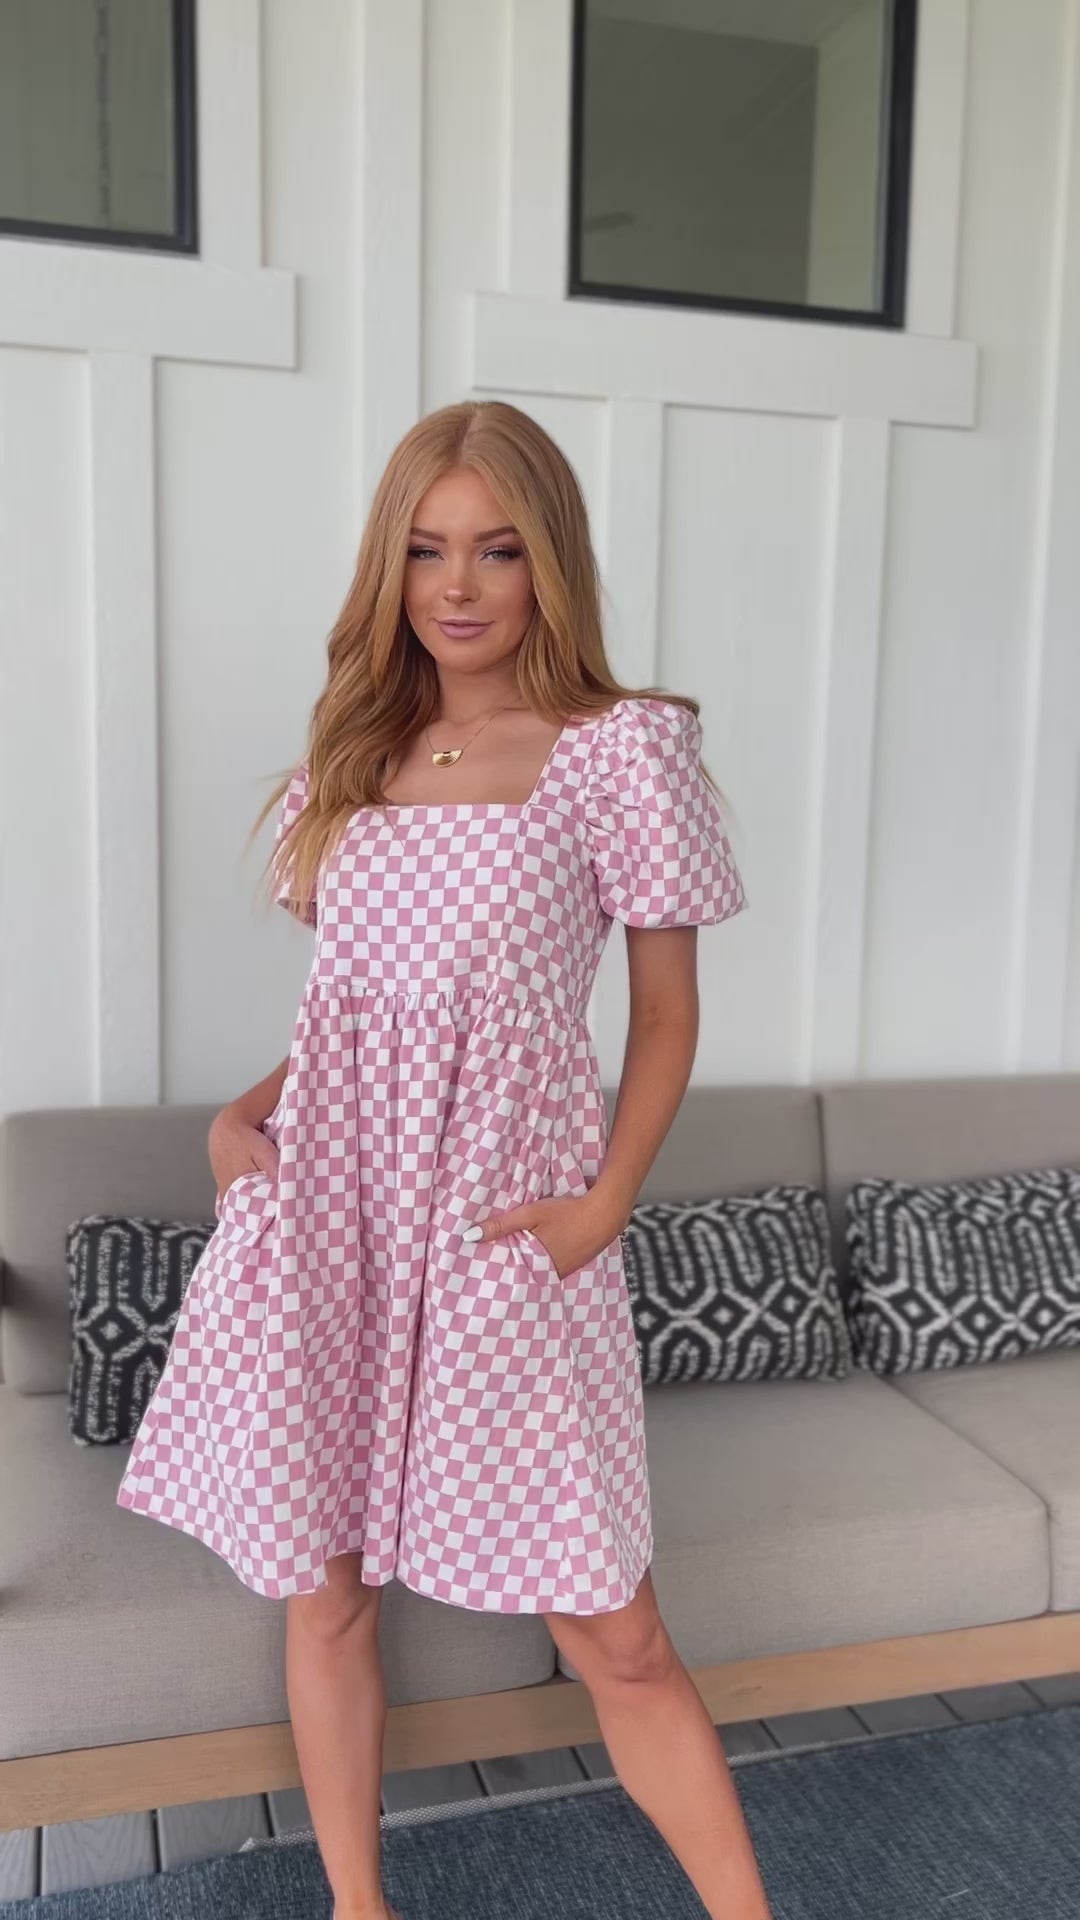 DOORBUSTER: The Moment Checkered Babydoll Dress (Ships in 1-2 Weeks)